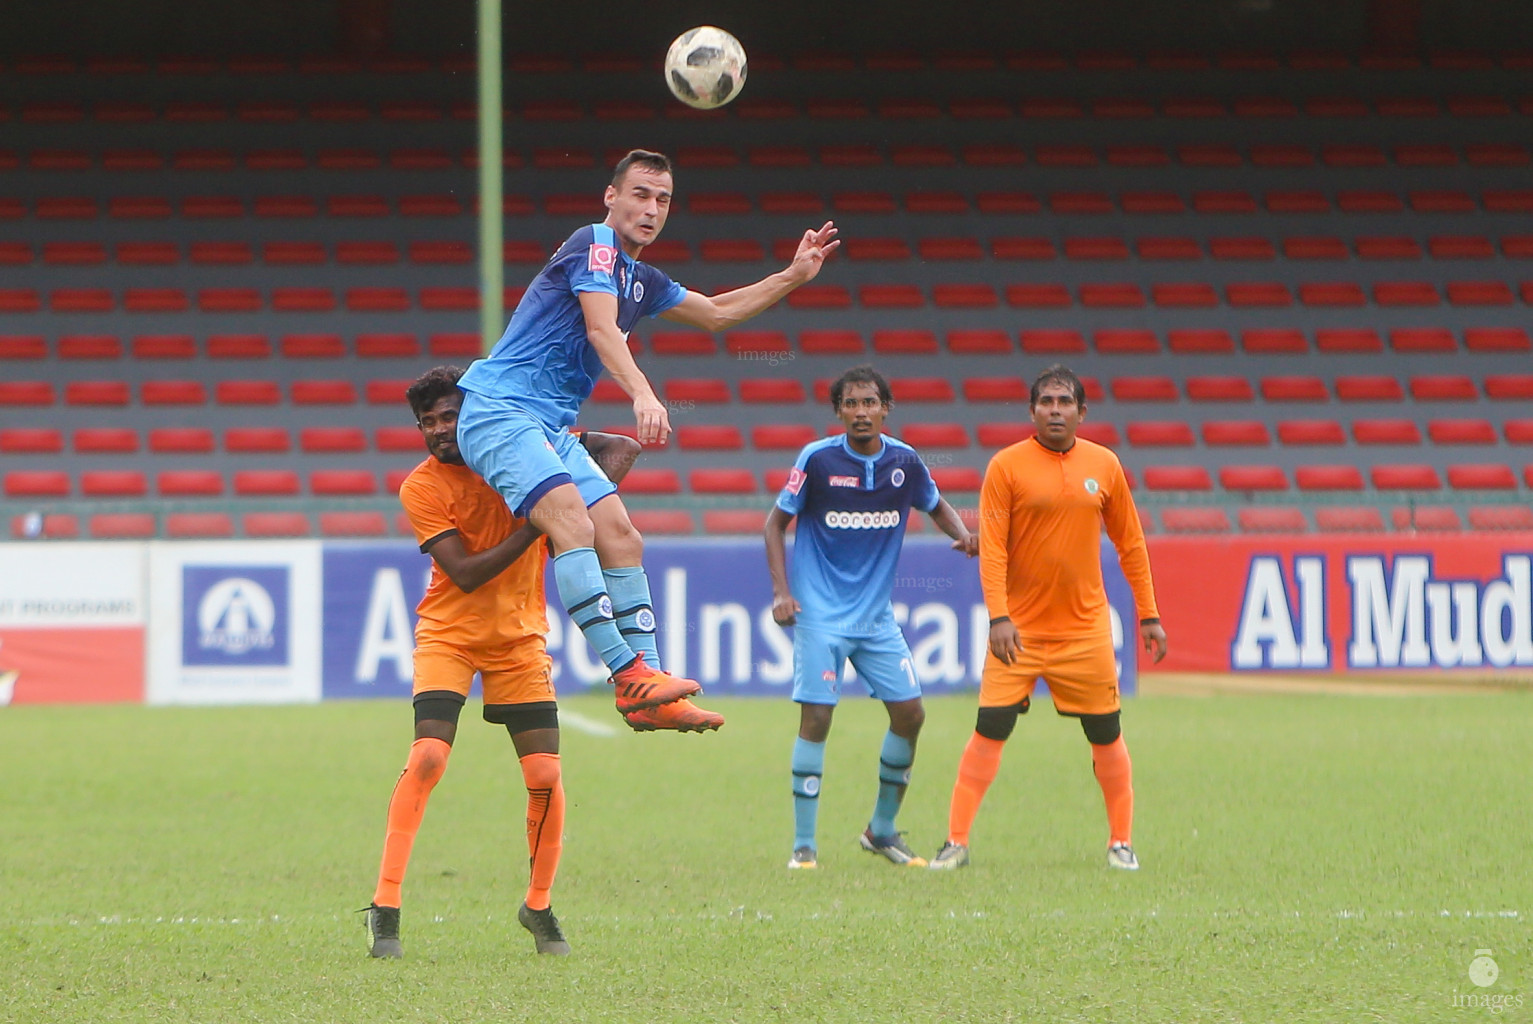 New Radiant SC vs Fehendhoo in Dhiraagu Dhivehi Premier League 2018 in Male, Maldives, Monday, October 1, 2018. (Images.mv Photo/Suadh Abdul Sattar)